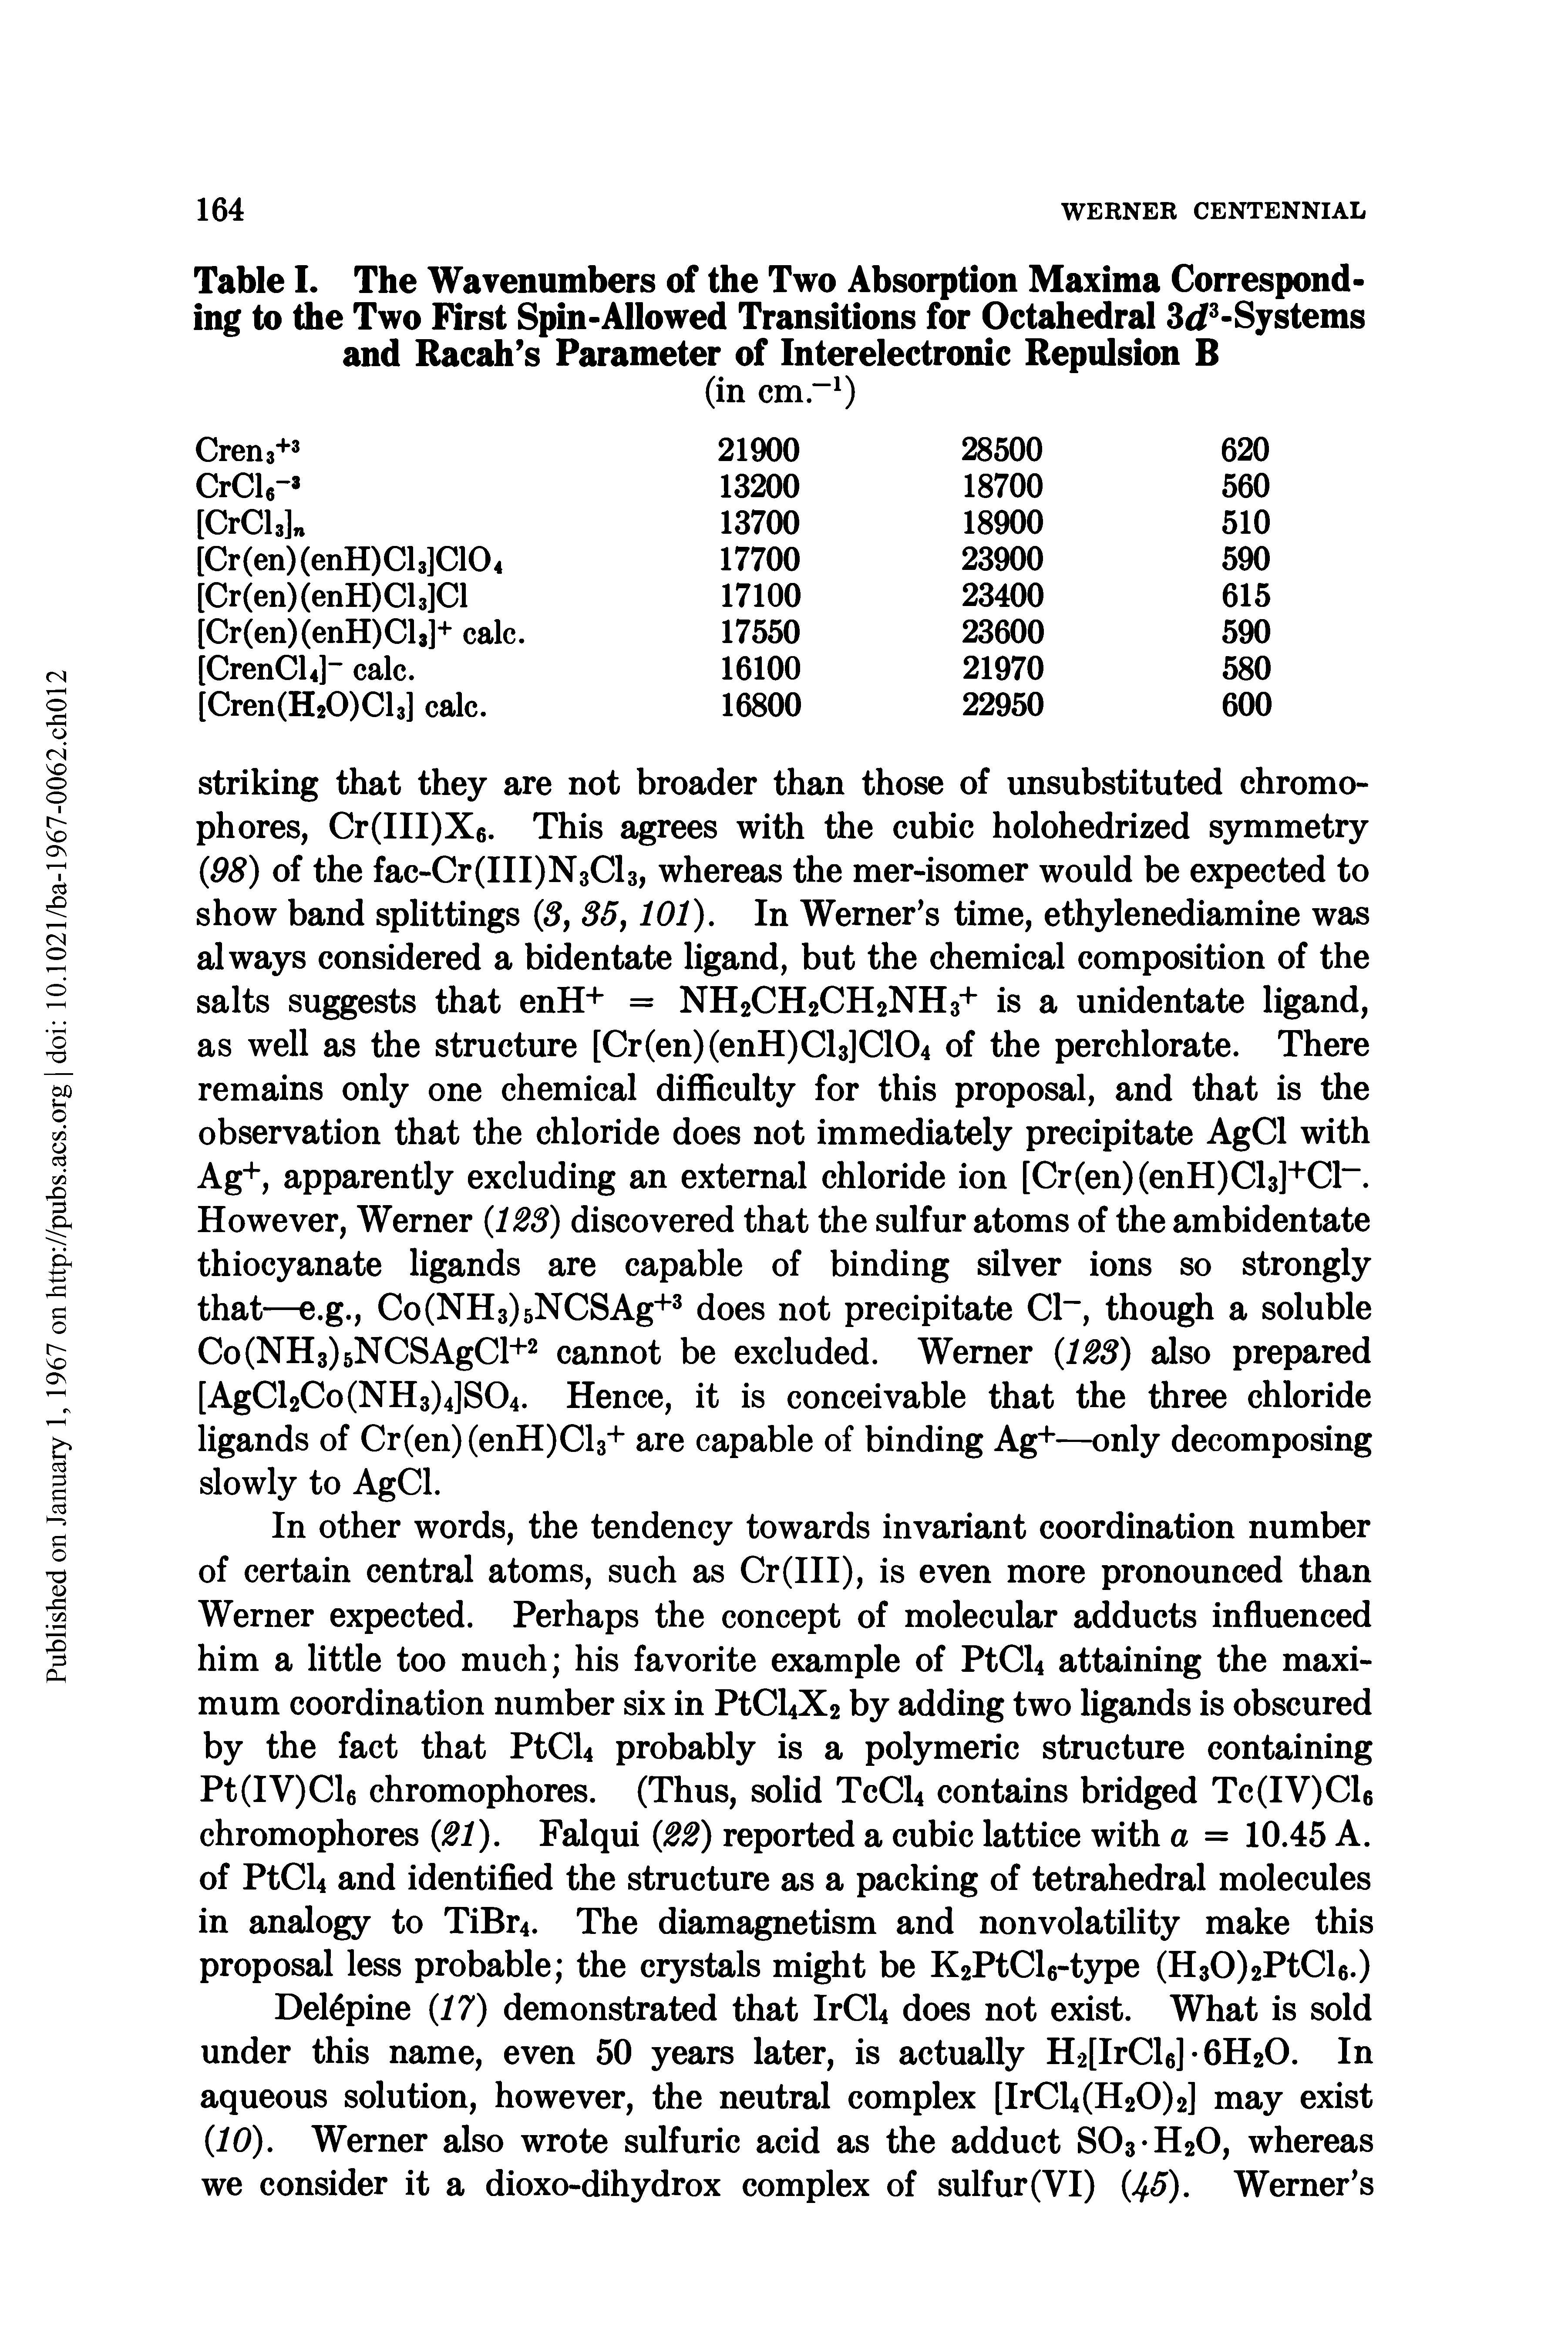 Table I. The Wavenumbers of the Two Absorption Maxima Corresponding to the Two First Spin-Allowed Transitions for Octahedral 3<f -Systems and Racah s Parameter of Interelectronic Repulsion B...